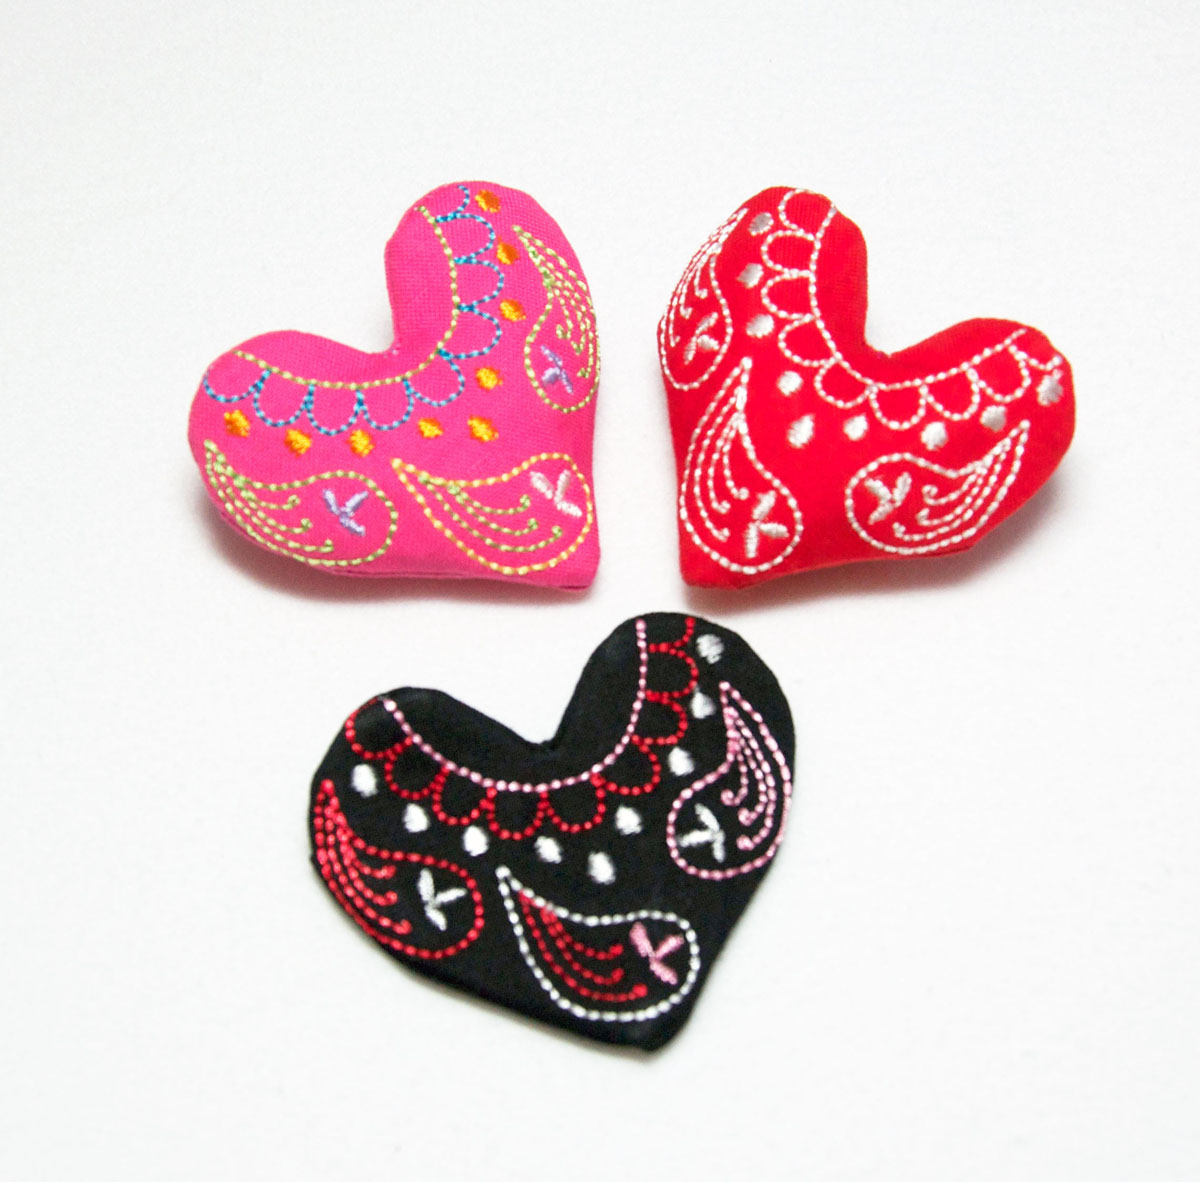 Free Machine Embroidery Patterns To Download Embroidered Heart Pin And Free Embroidery Design Weallsew